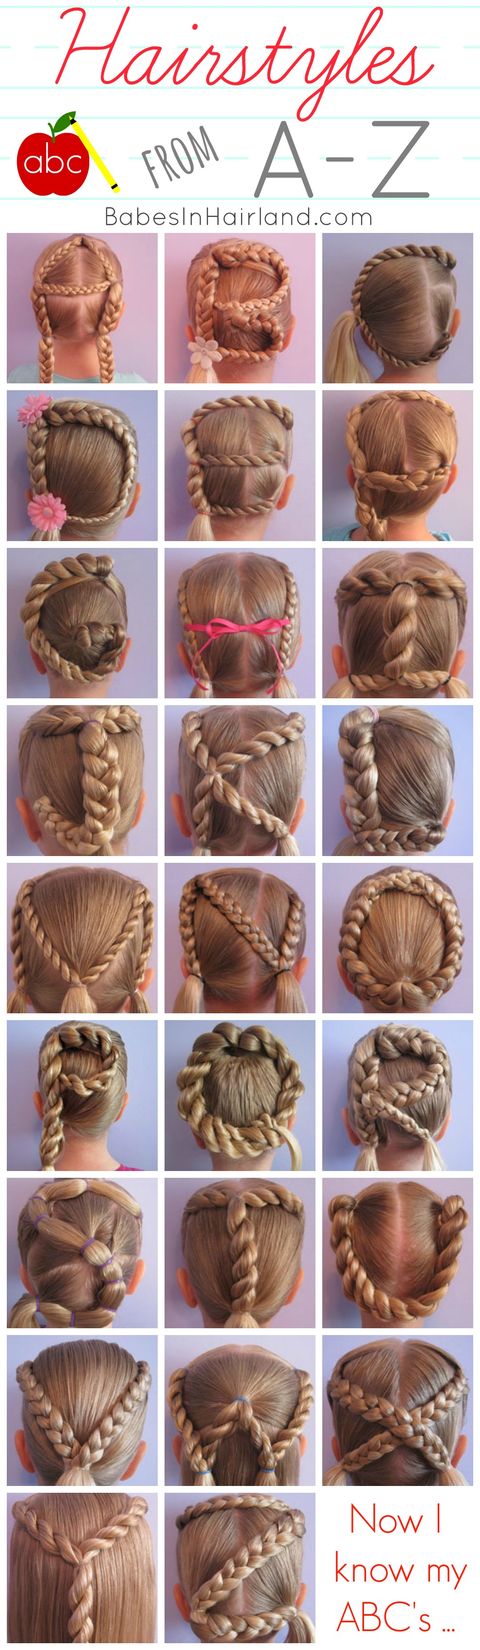 Brown, Hairstyle, Style, Hair accessory, Liver, Brown hair, Fawn, Natural material, Hair coloring, Artificial hair integrations, 